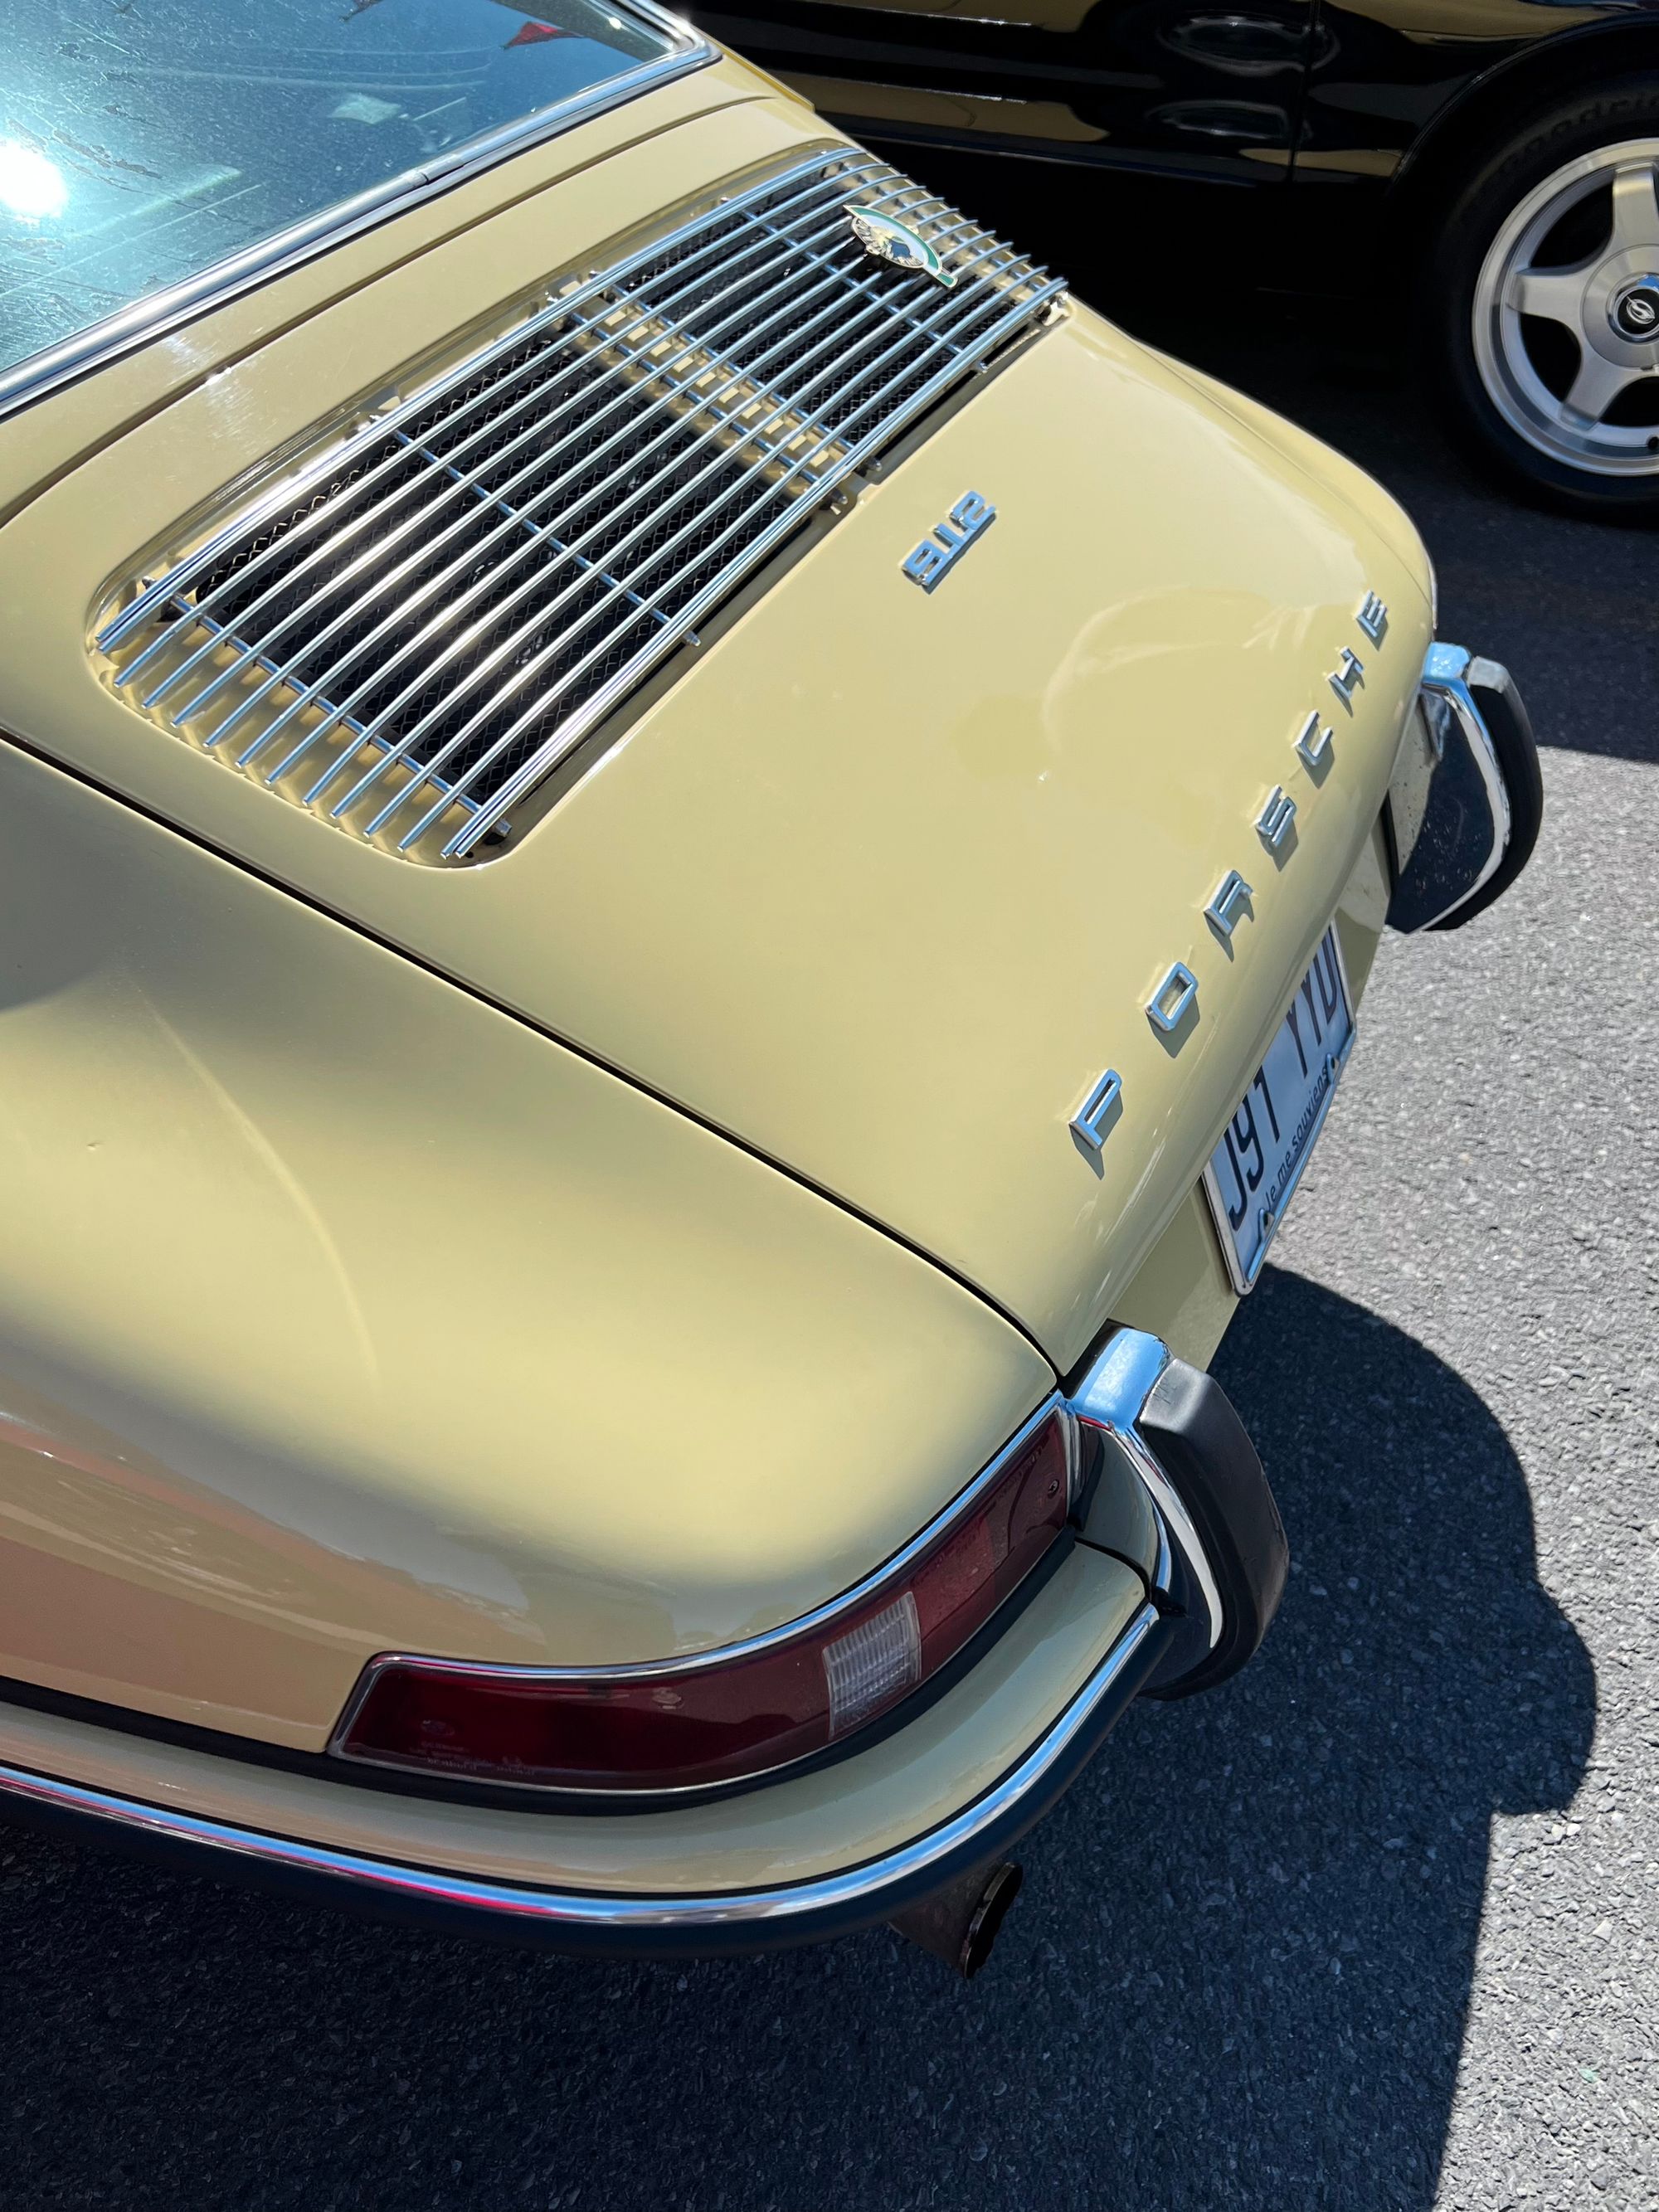 rear deck of porsche 912 from above, nurburgring badge on rear chrome vent